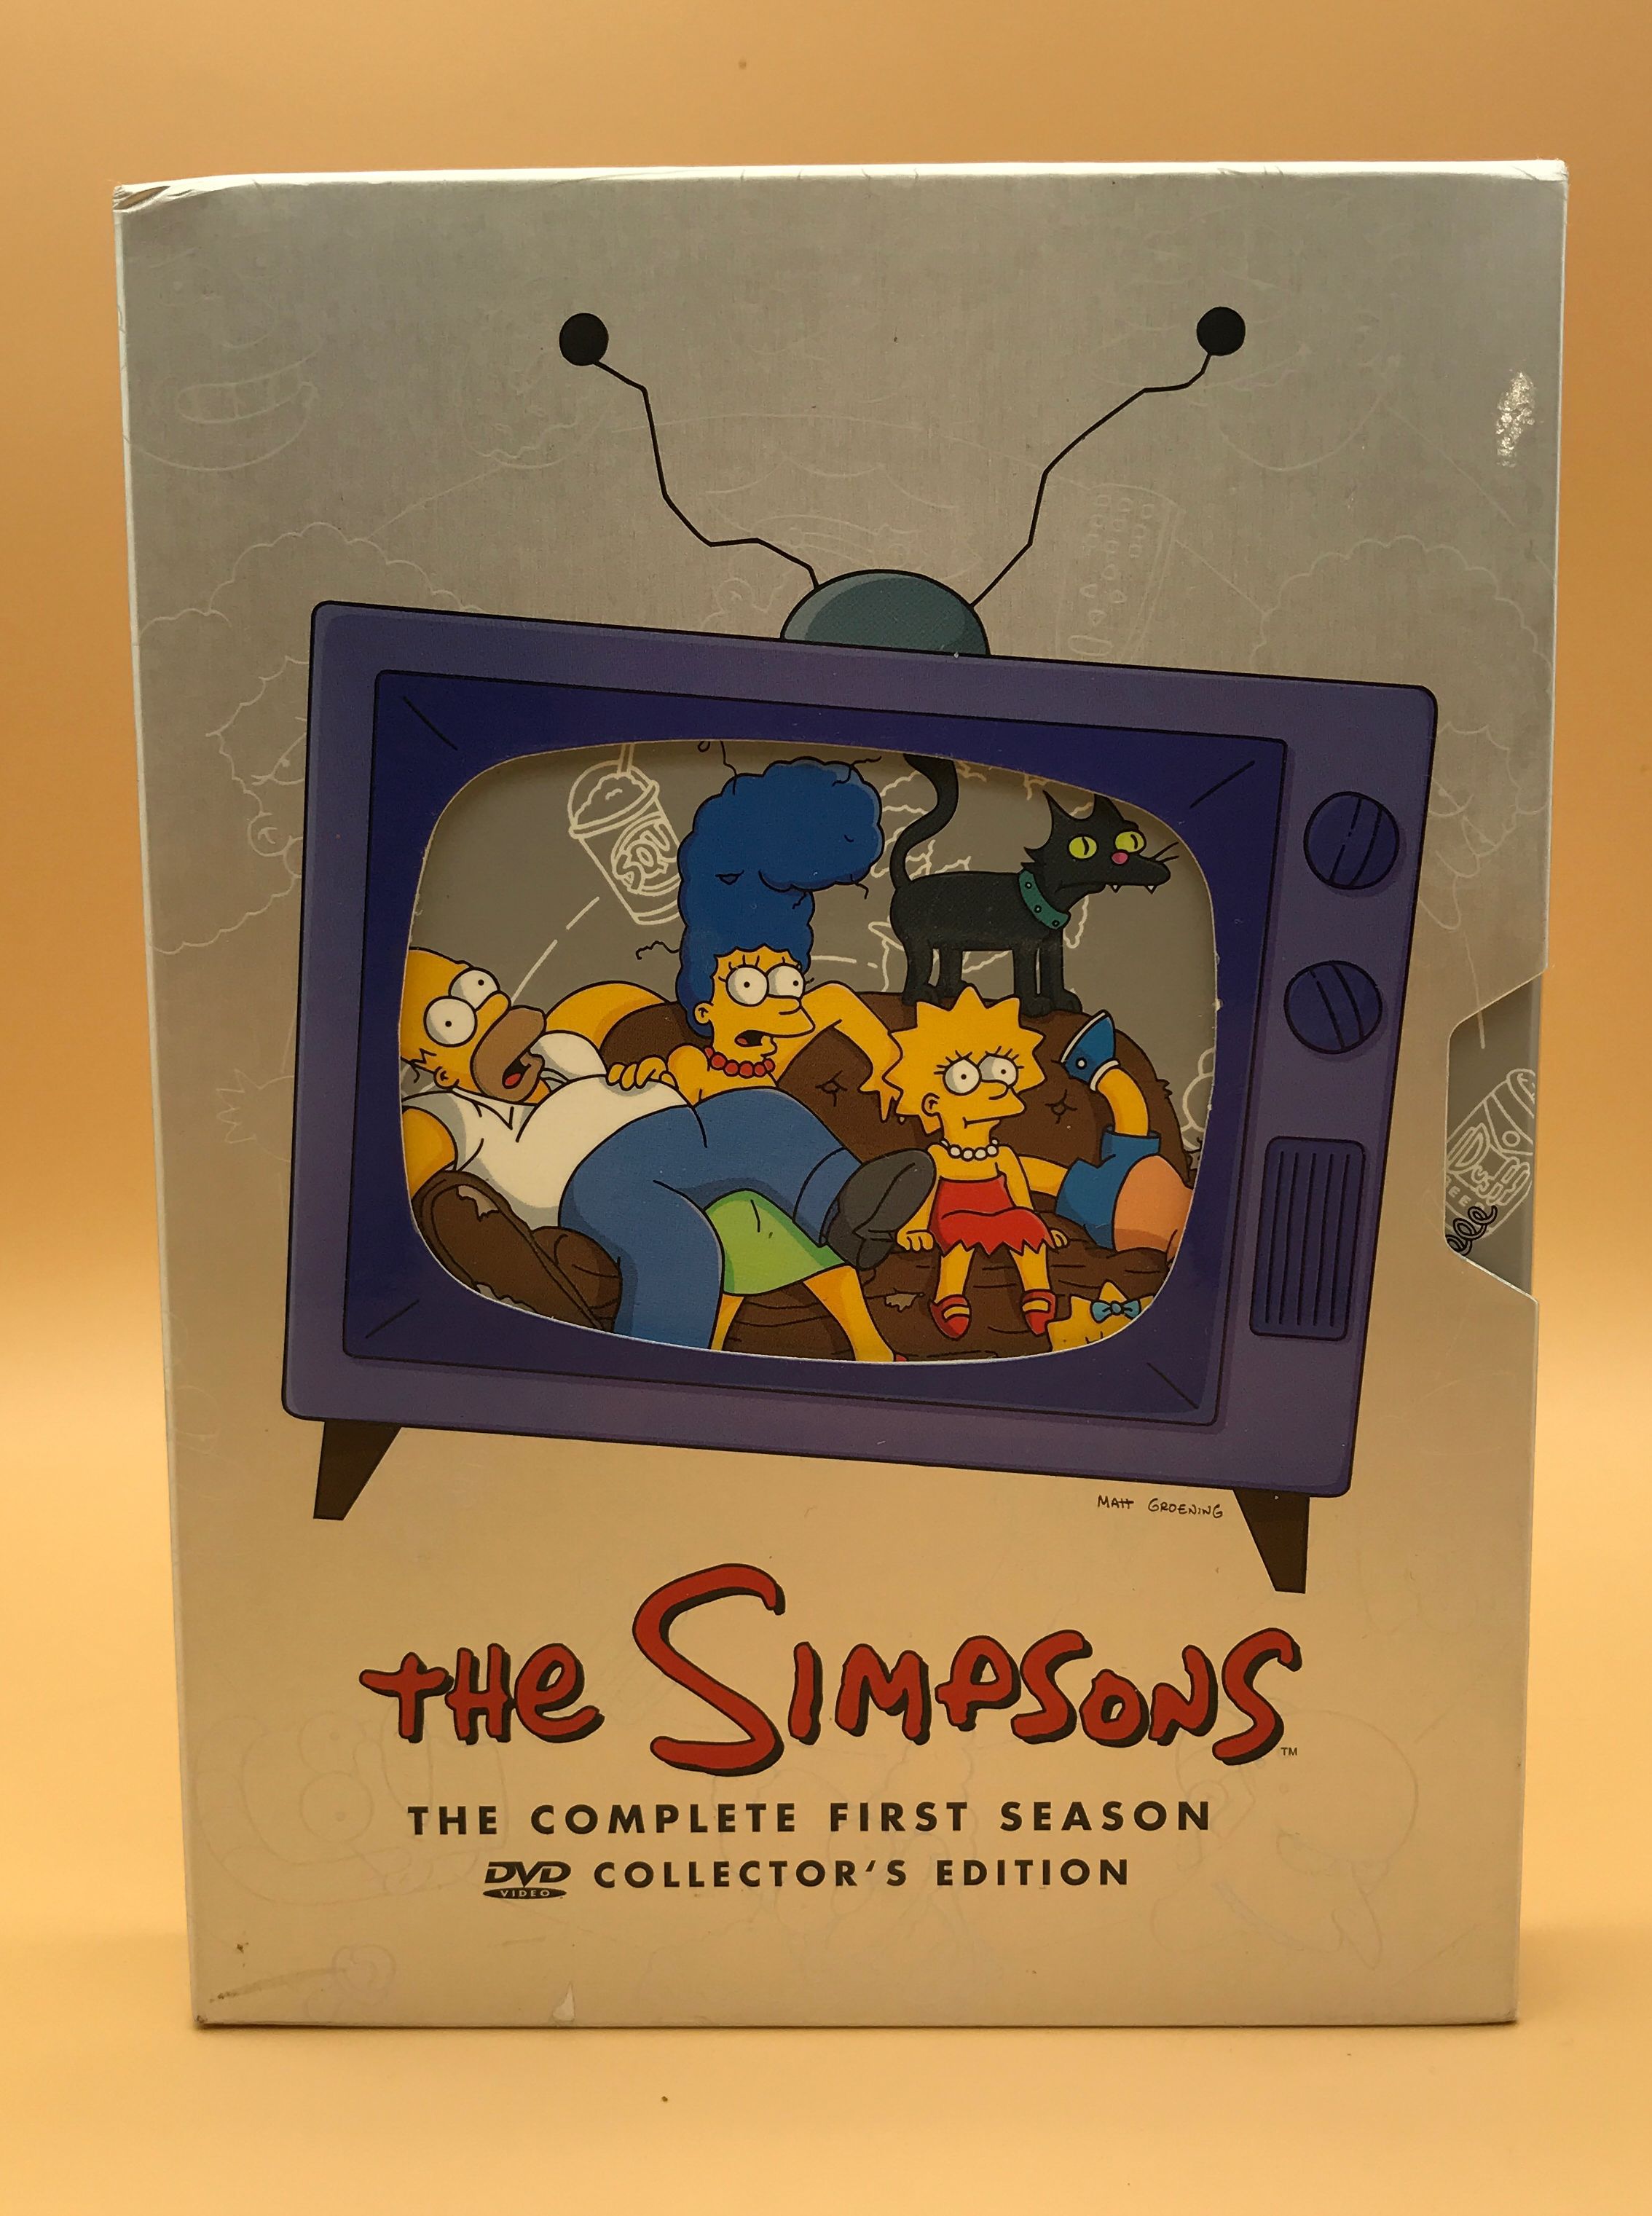 The Simpsons - The Complete First Season DVD Collector's Edition - Season 1